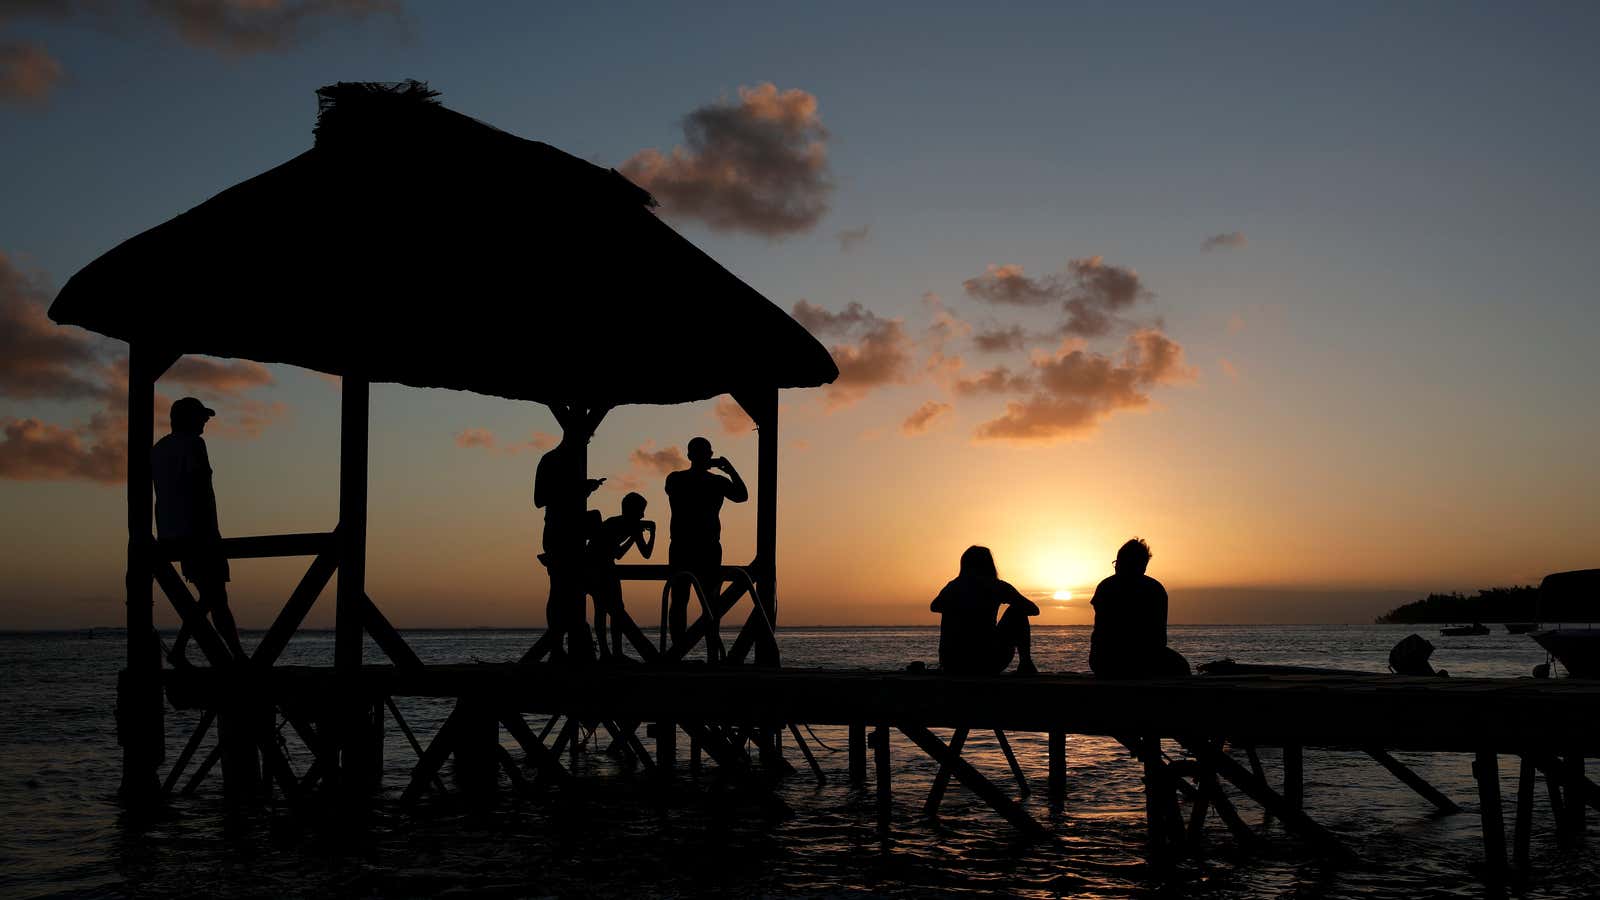 People watch as the sunset in Mauritius drops as low as its tax rates.